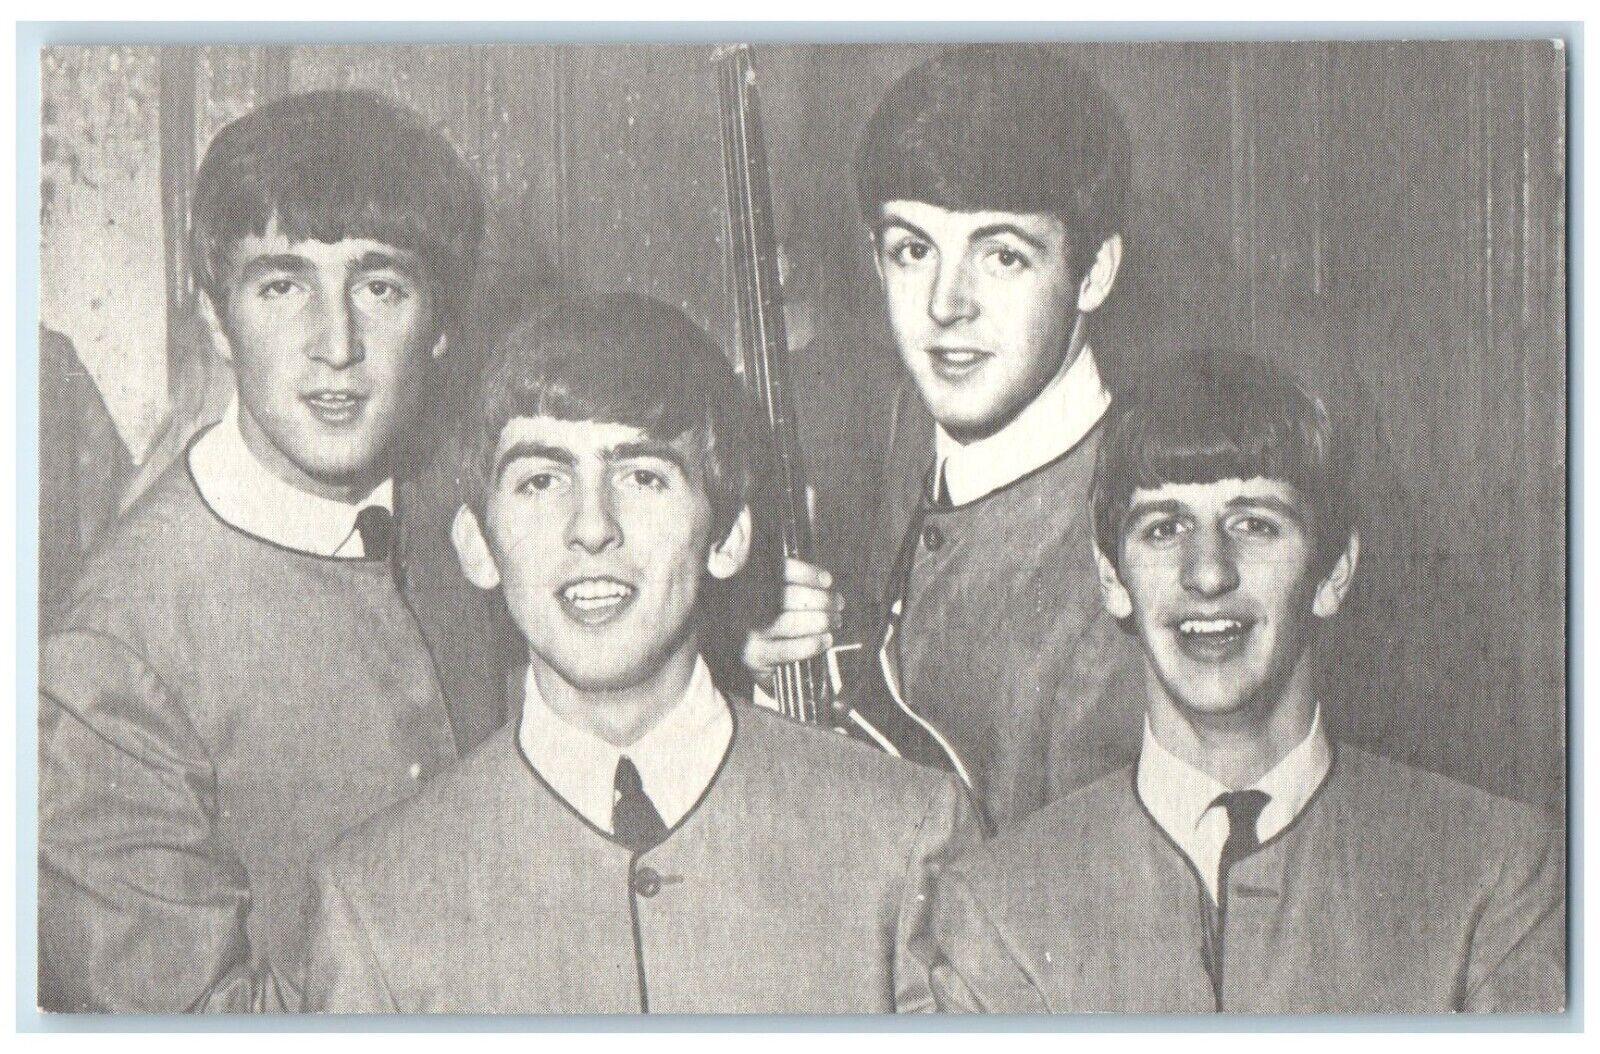 1964 The Beatles Rock Band Musicians John Lennon Formed In Liverpool Postcard